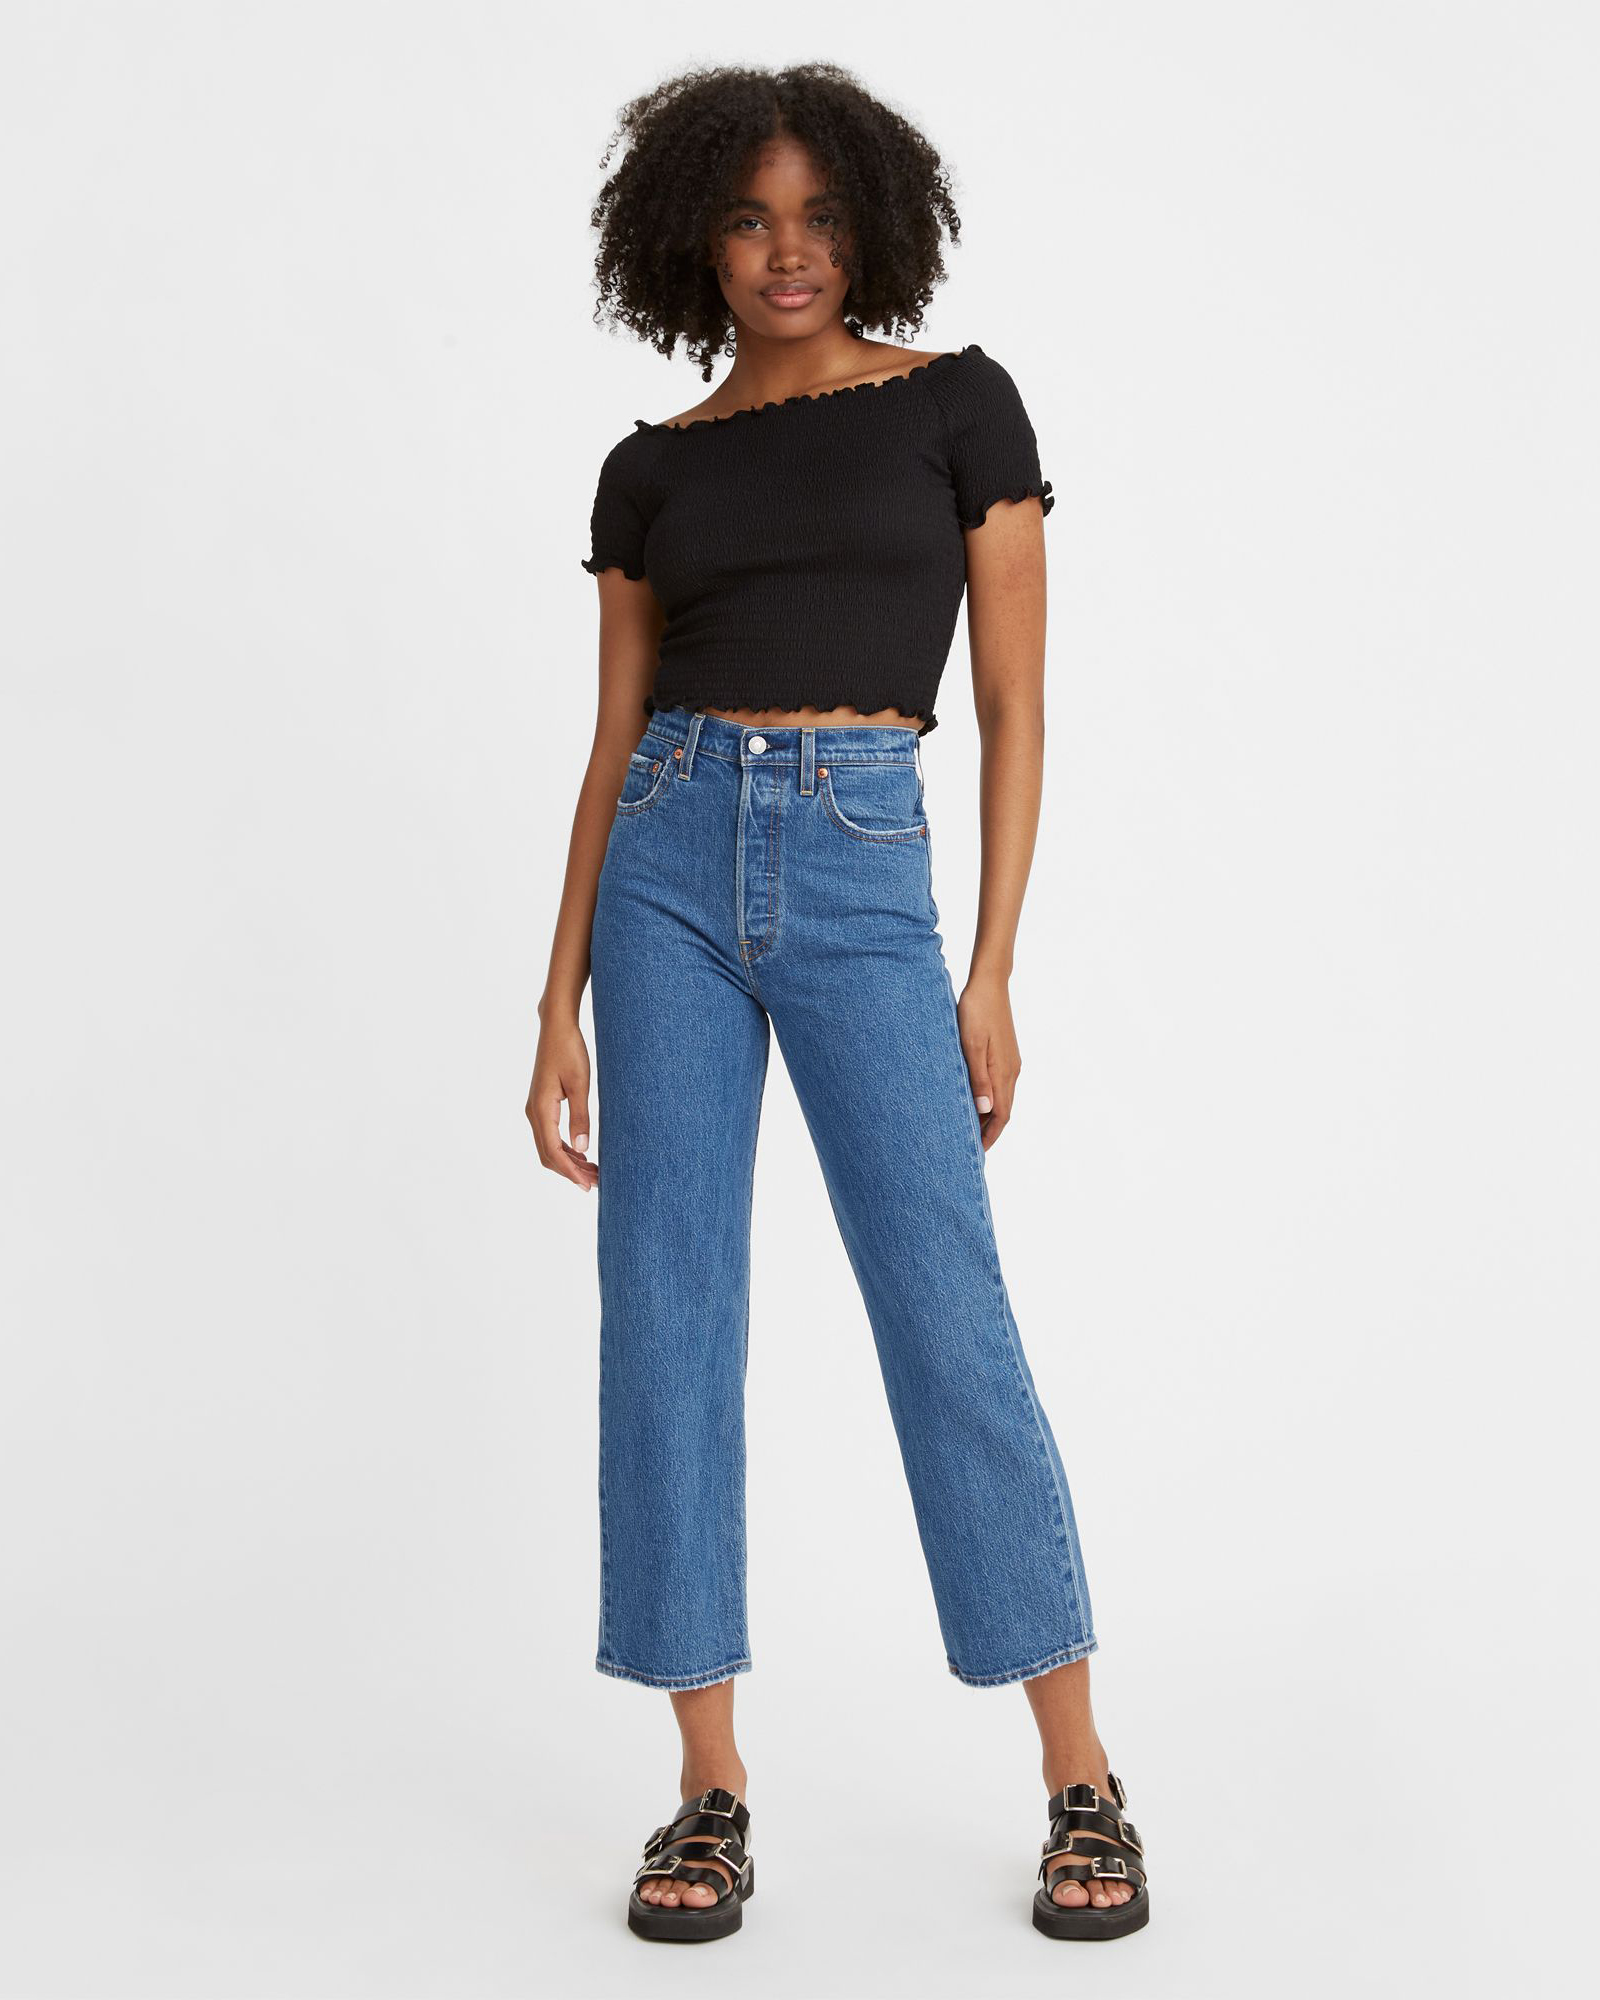 Jeans Ribcage Straight Ankle - Jazz Pop